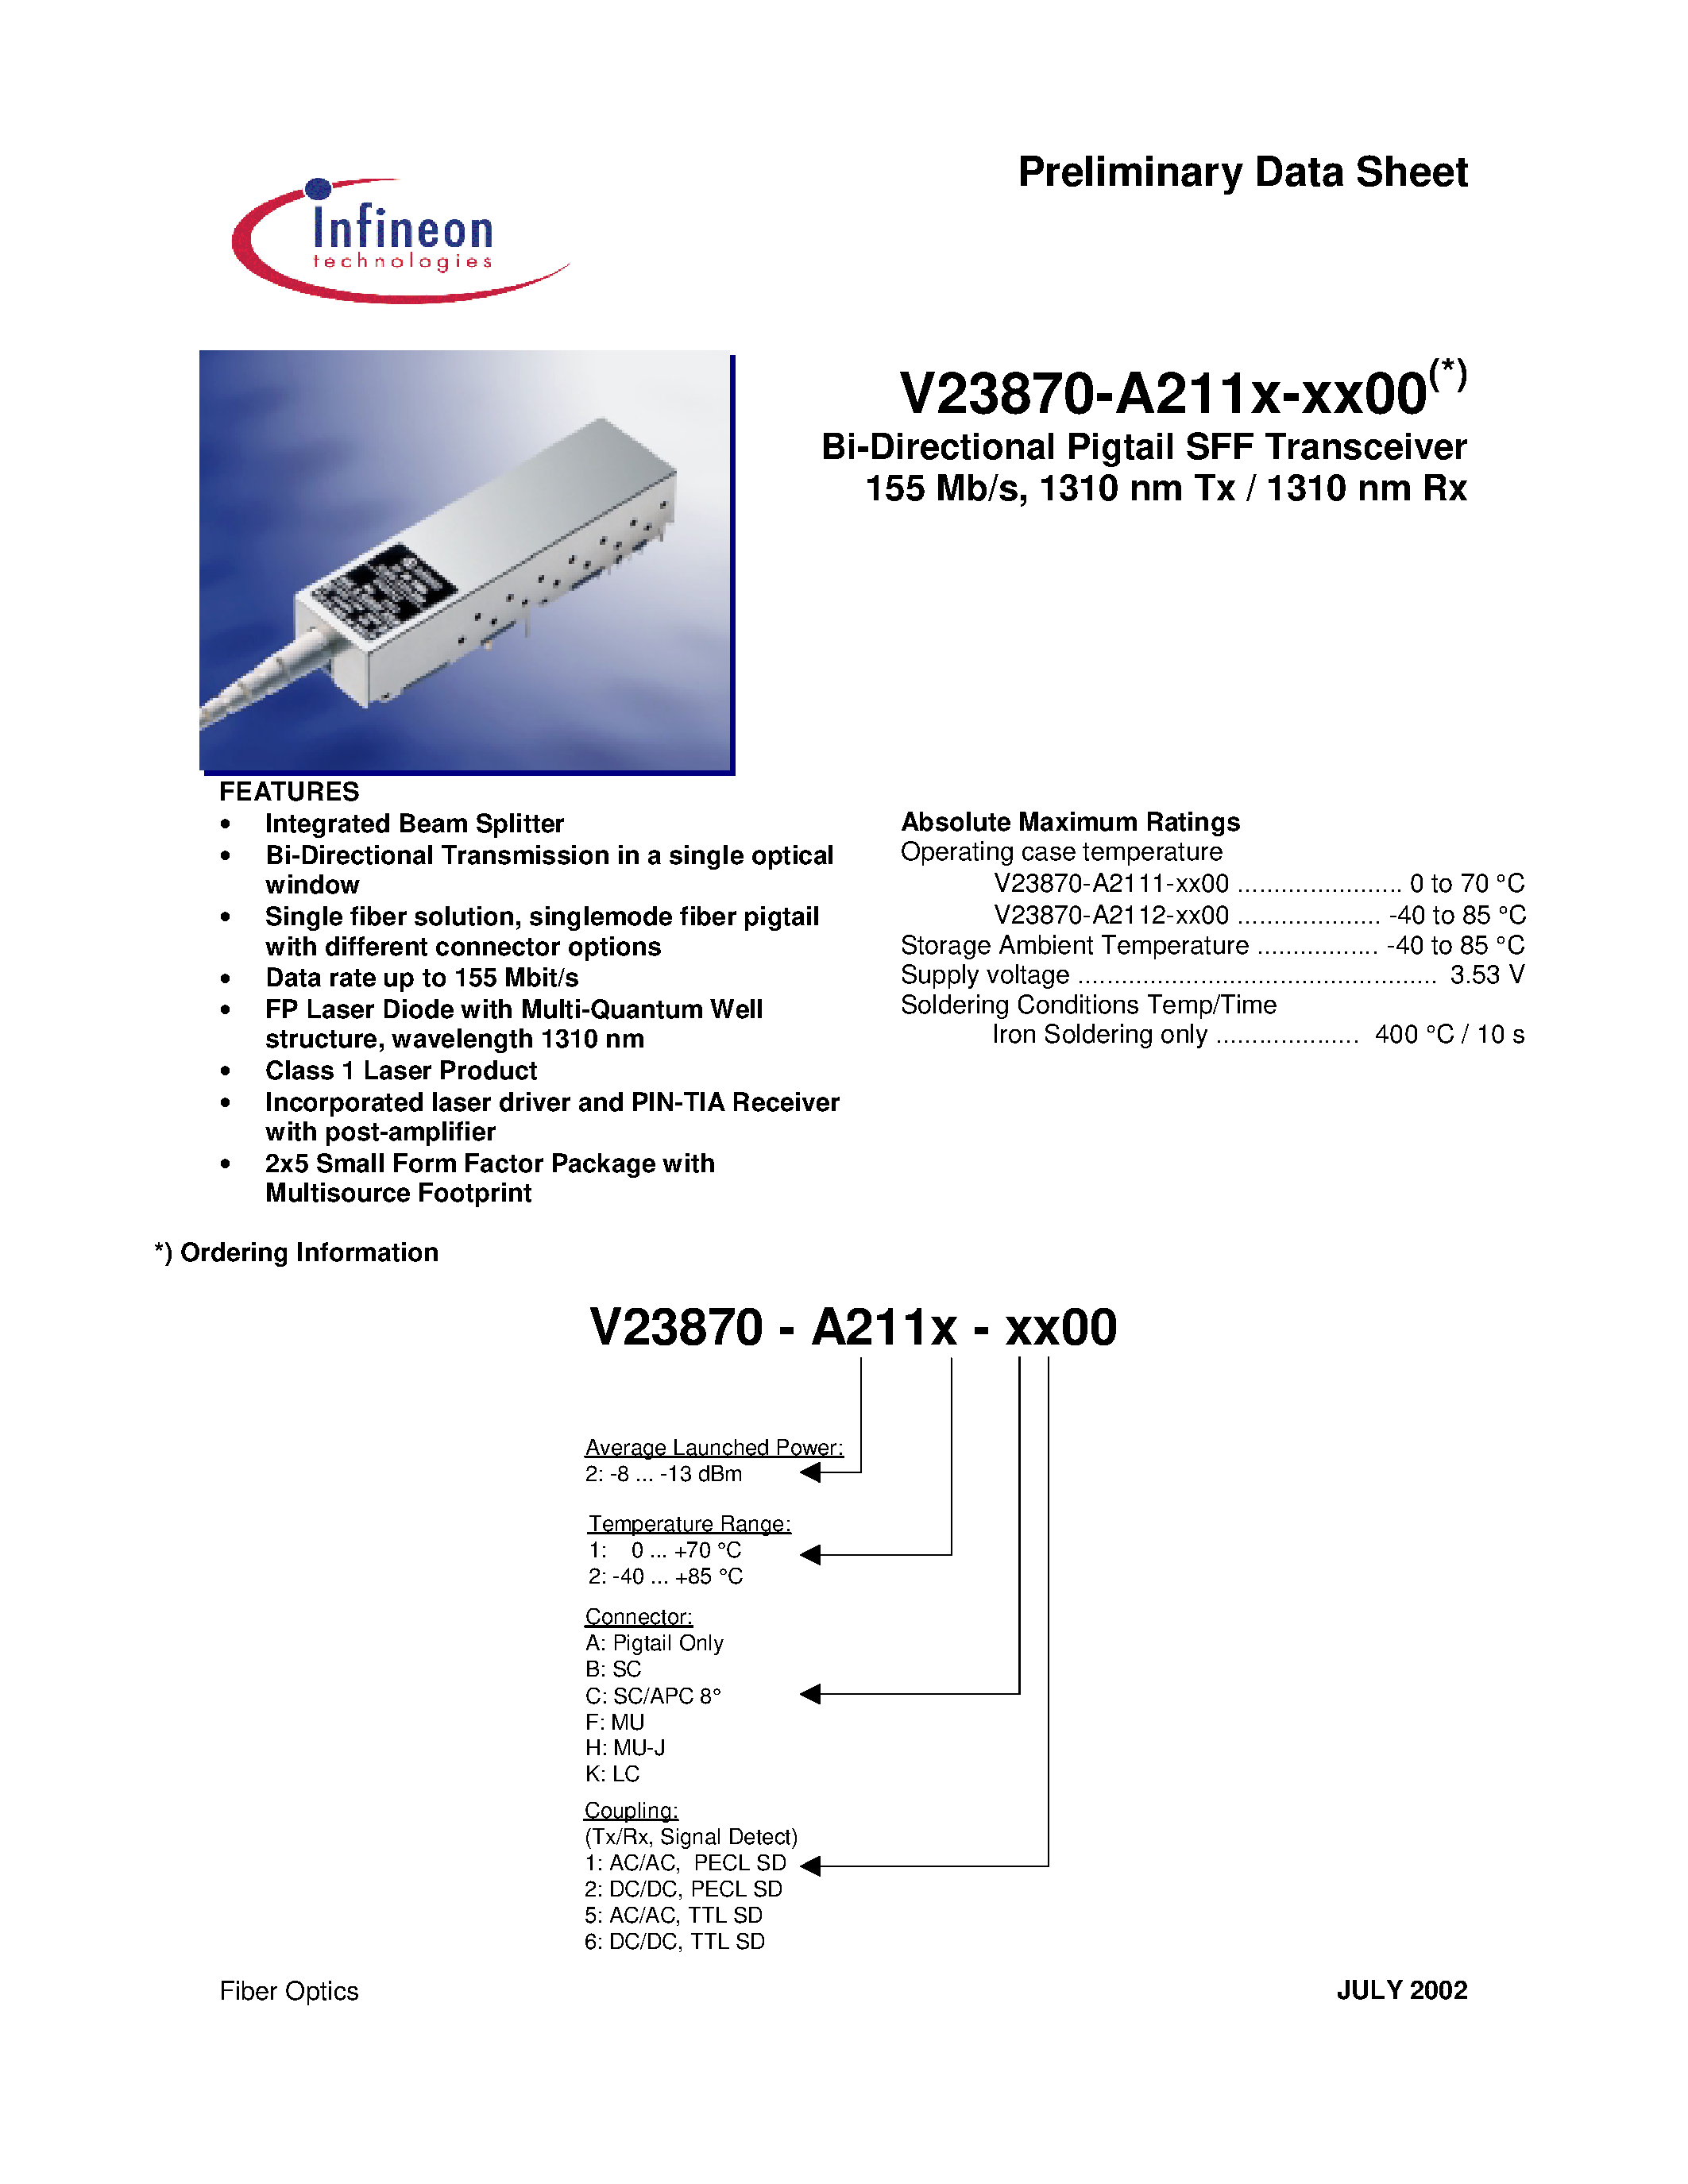 Datasheet V23870-A2112-B500 - Bi-Directional Pigtail SFF Transceiver 155 Mb/s/ 1310 nm Tx / 1310 nm Rx page 1